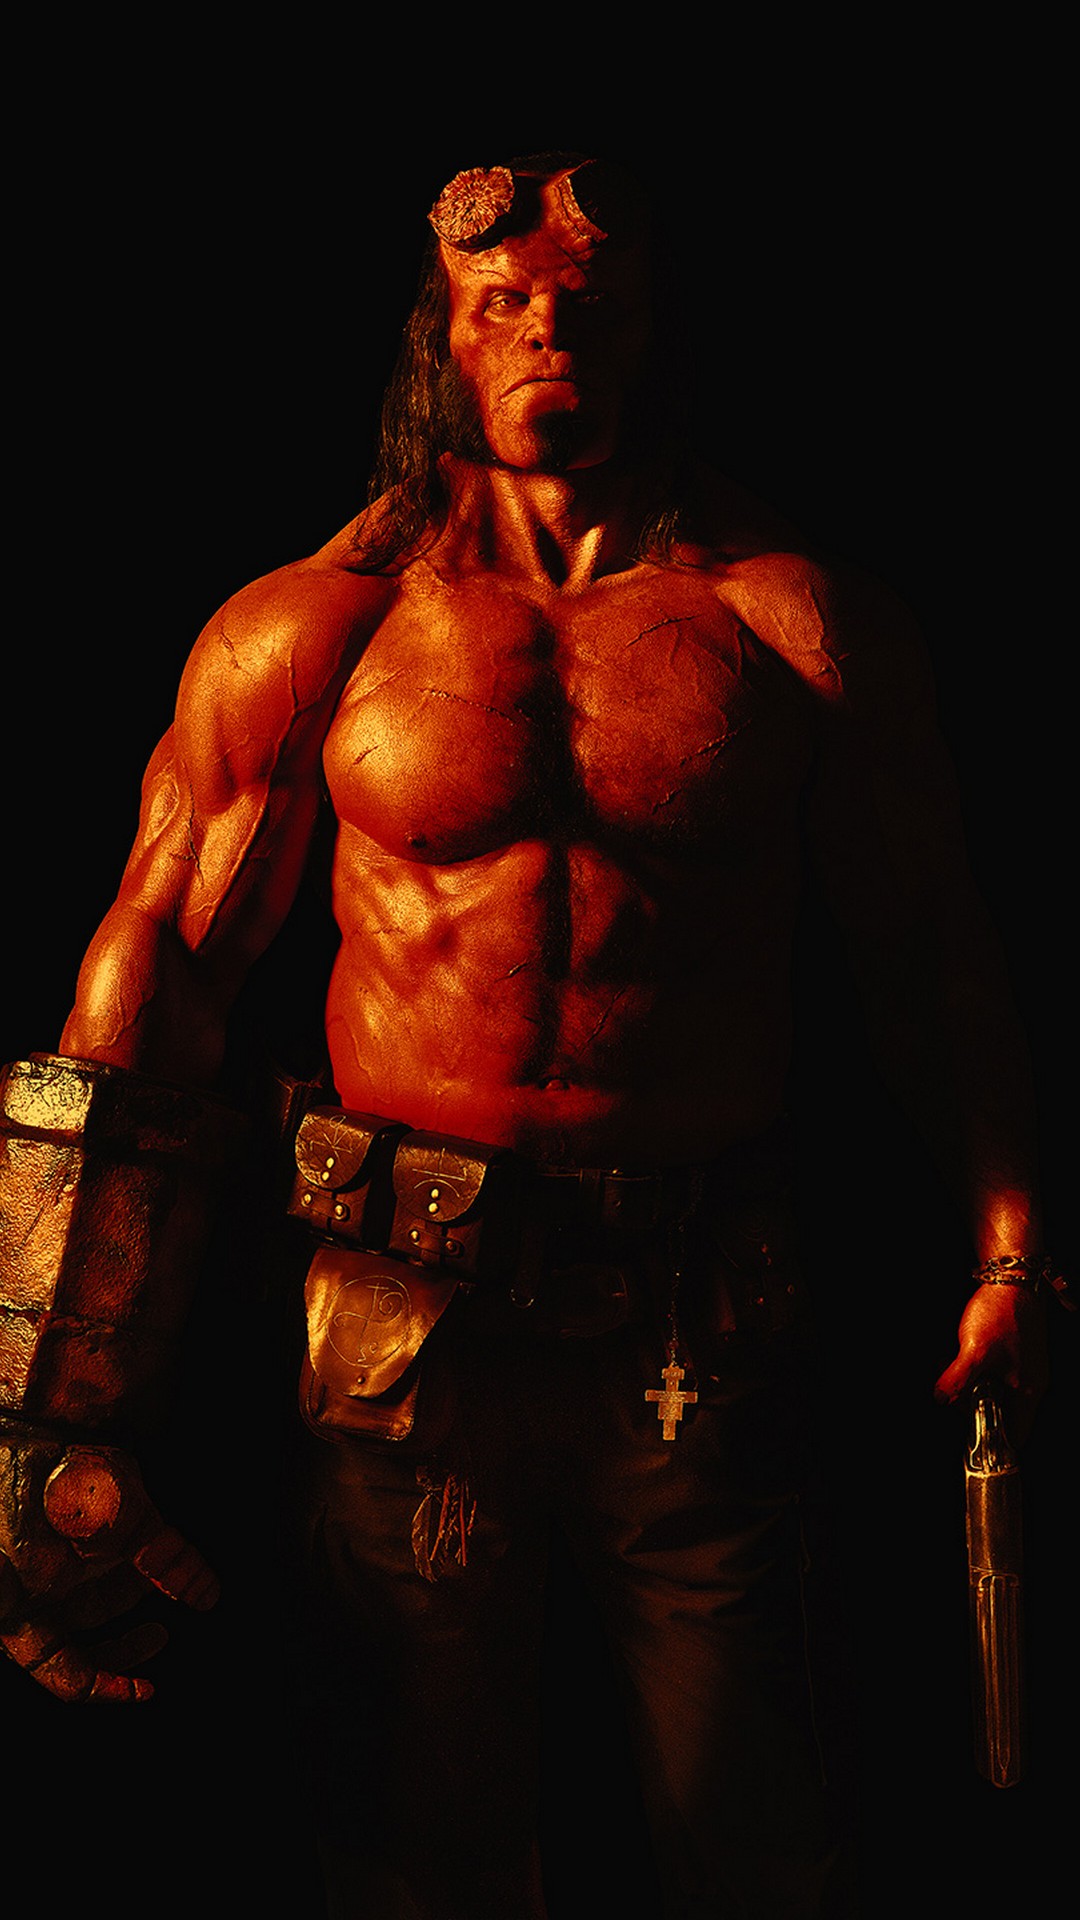 Hellboy 2019 Wallpaper For iPhone With high-resolution 1080X1920 pixel. You can use this wallpaper for your Desktop Computer Backgrounds, Mac Wallpapers, Android Lock screen or iPhone Screensavers and another smartphone device